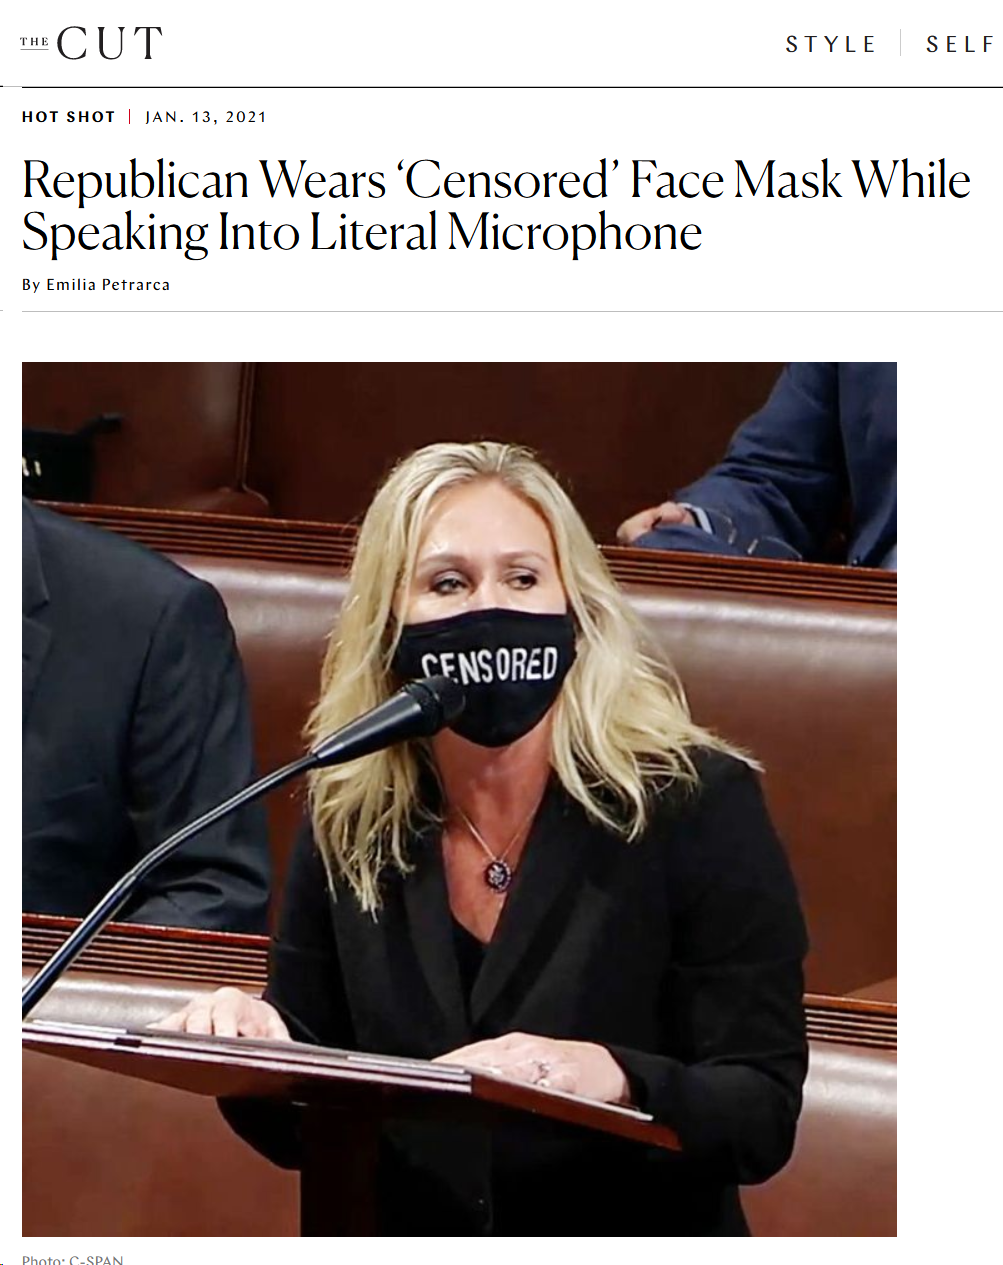 photo caption - Cut Style Self Hot Shot Jan. 13, 2021 Republican Wears 'Censored' Face Mask While Speaking Into Literal Microphone By Emilia Petrarca Sensored In